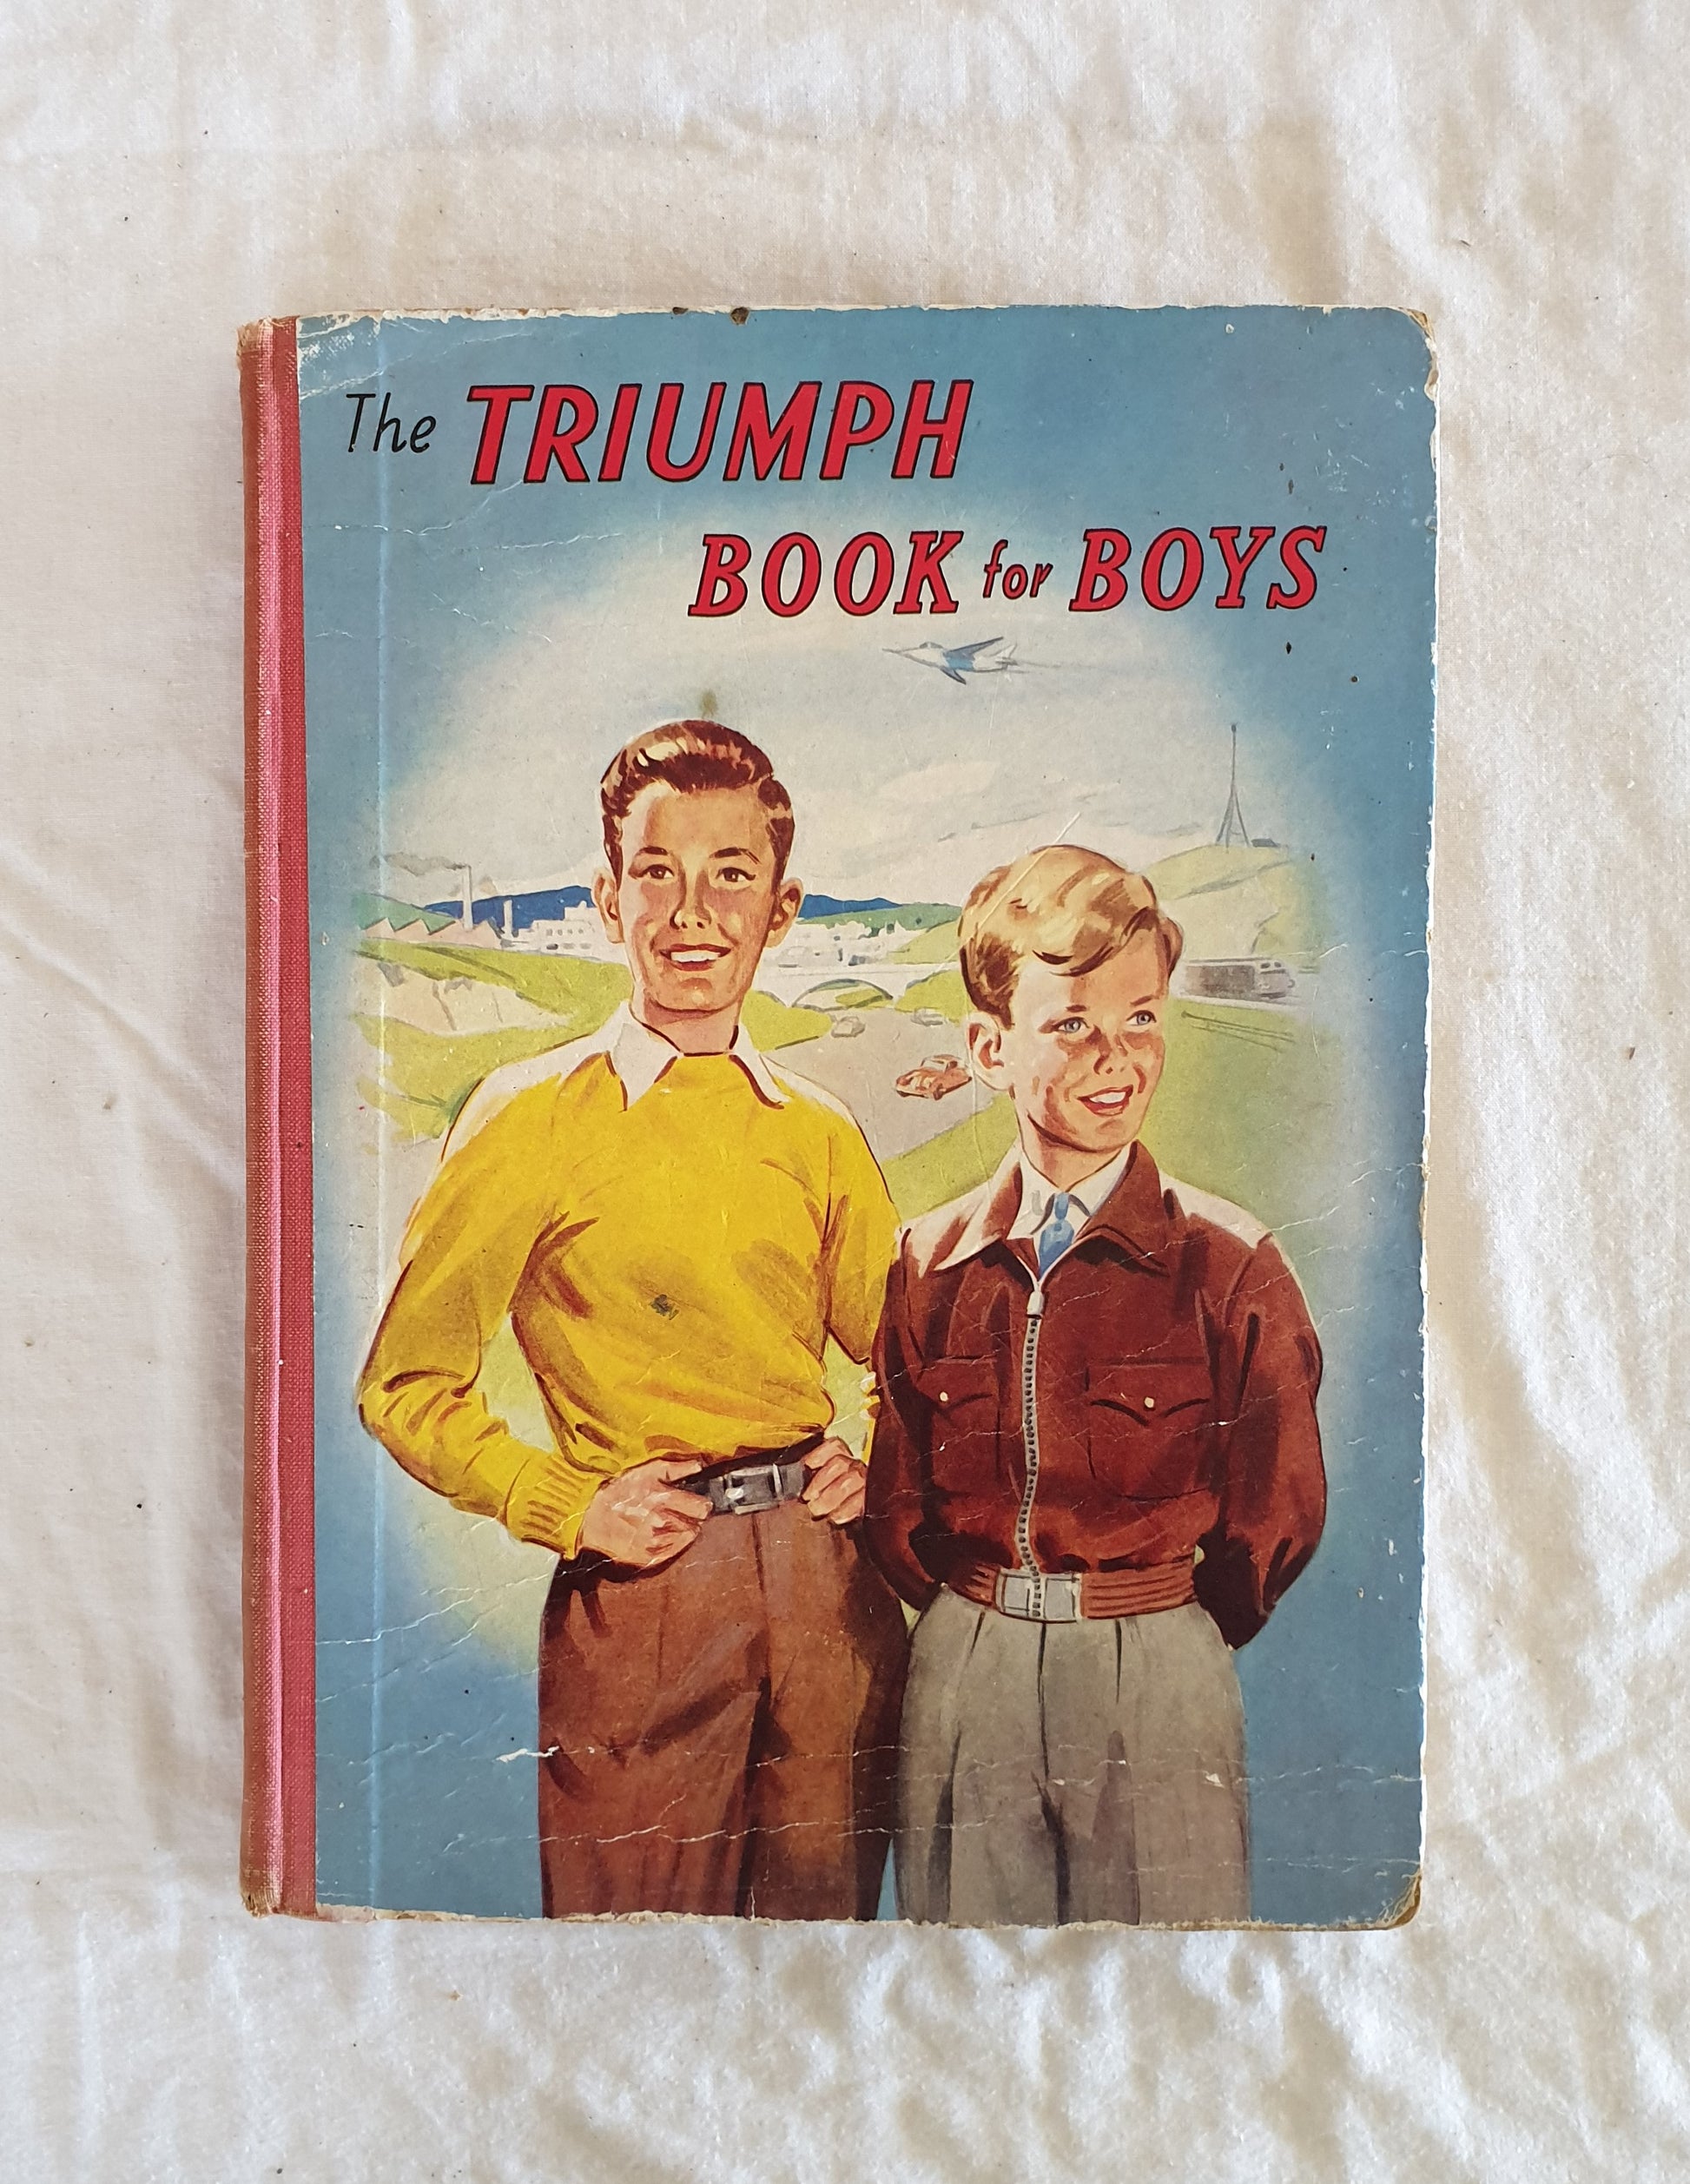 The Triumph Book for Boys illustrated by Gaffron